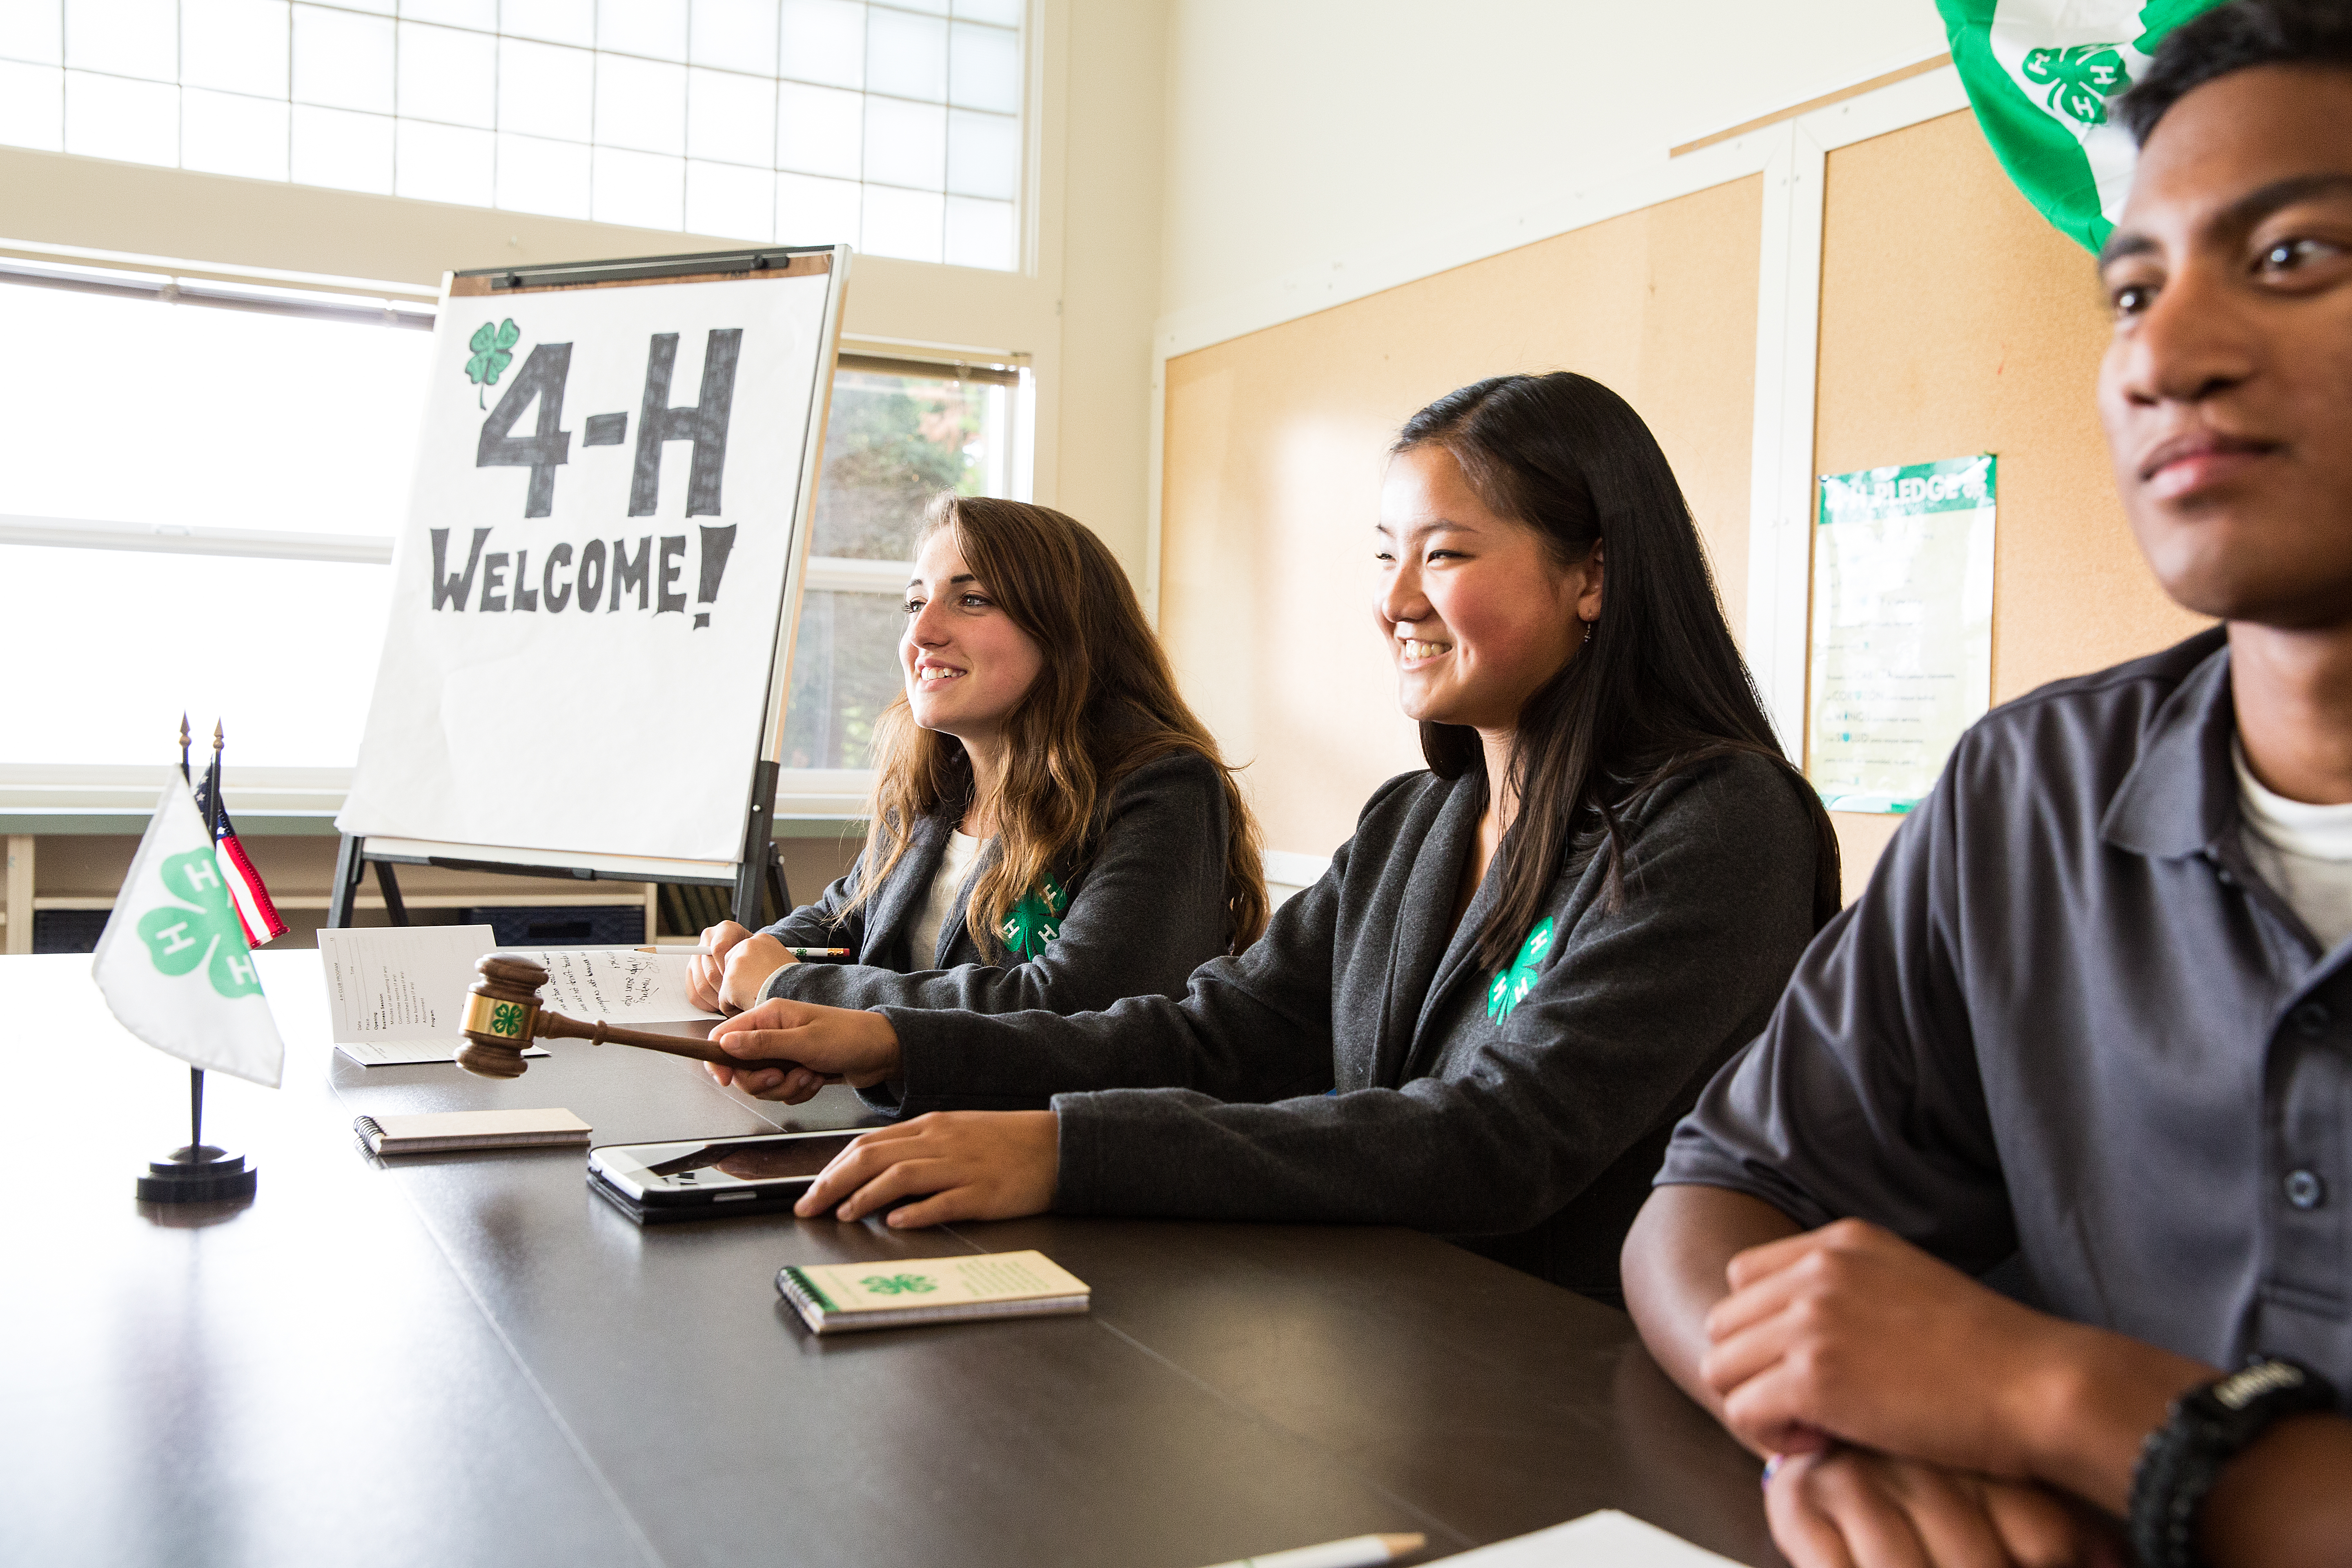 Left to right, two teenage girls and one teenage boy sitting at a head table in a classroom There is the American flag and 4-H flag poised on the table in front of the middle girl. She is also holding a gavel mid-air ready to tap the gavel stand in front of her. A 4-H Welcome! sign written on a flip chart on an eisel to the right of the girl on the far left.